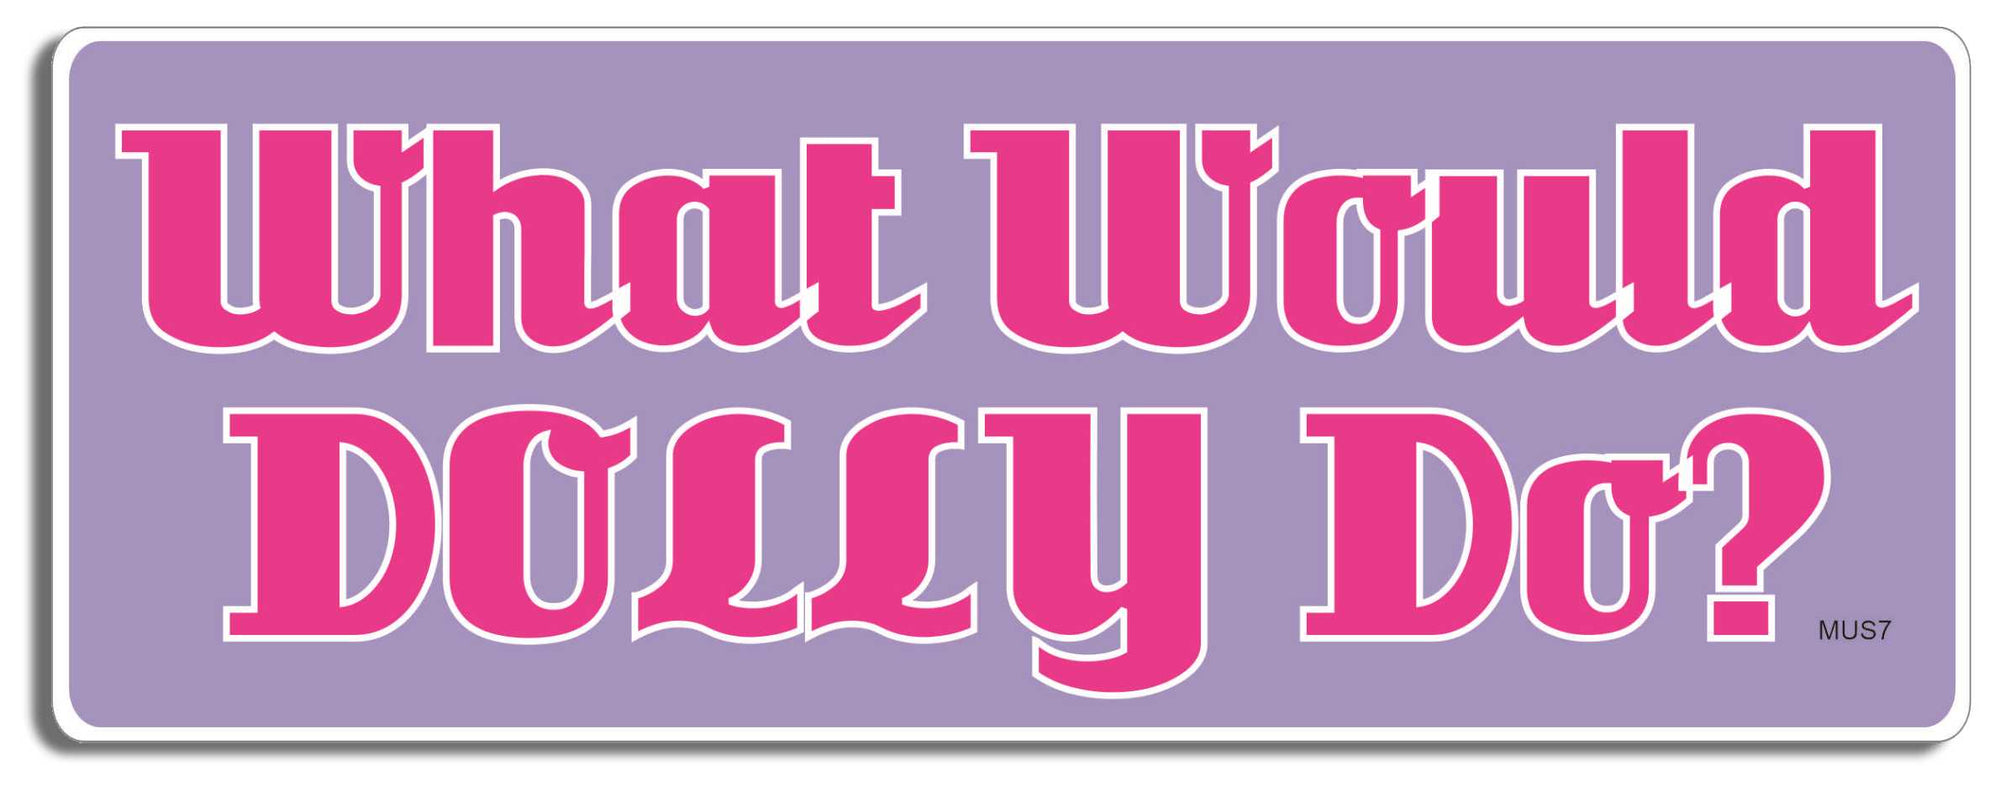 What Would Dolly Do? - 3" x 8" Bumper Sticker--Car Magnet- -  Decal Bumper Sticker-funny Bumper Sticker Car Magnet What Would Dolly Do?-  Decal for cars music